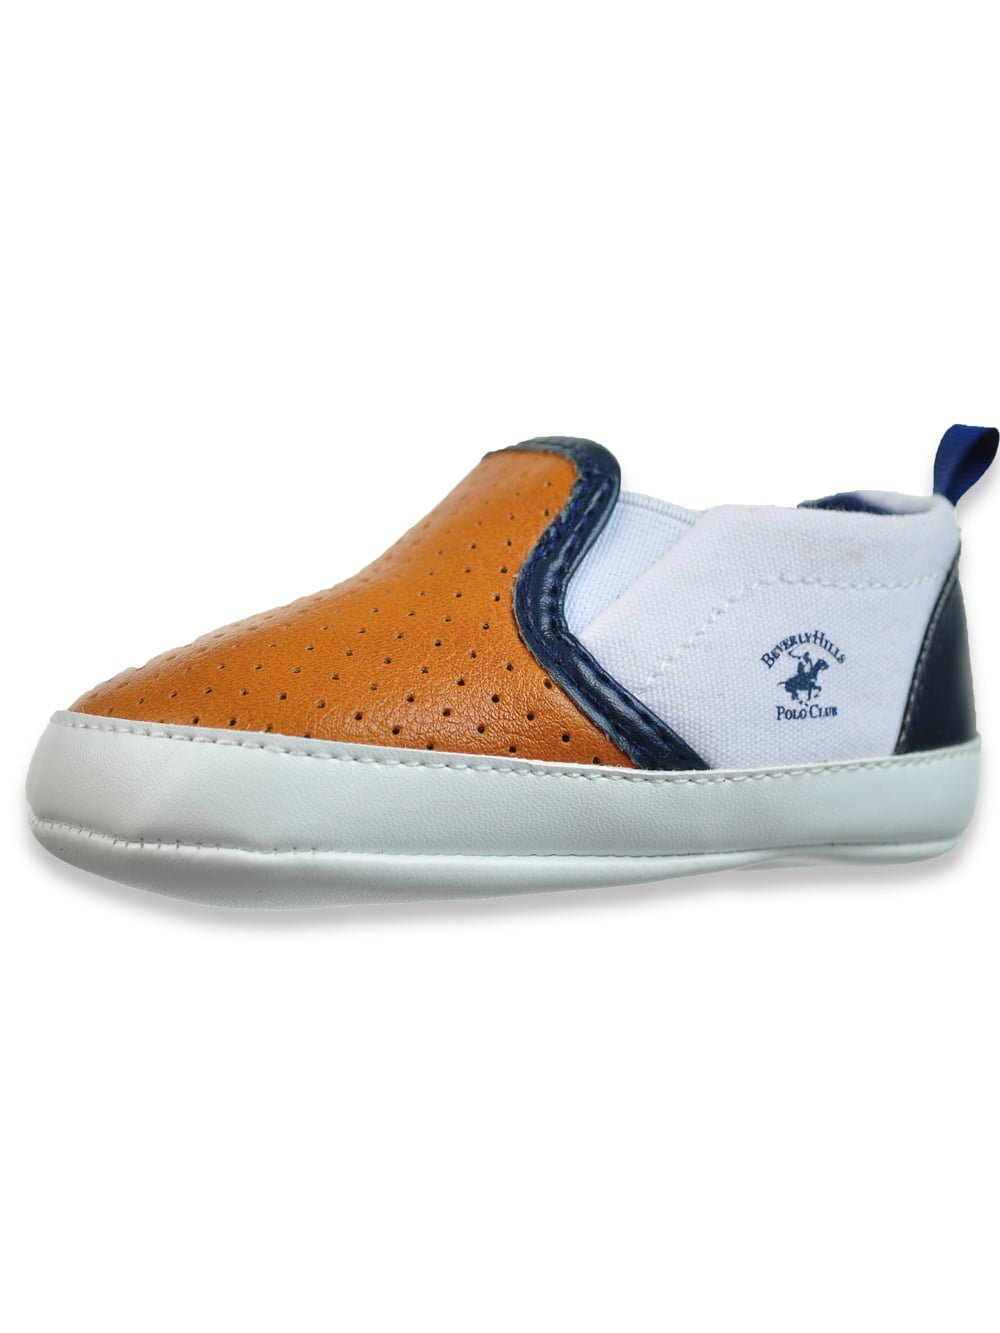 Infant/Toddler Beverly Hills Polo Club Boys’ Water Shoe 